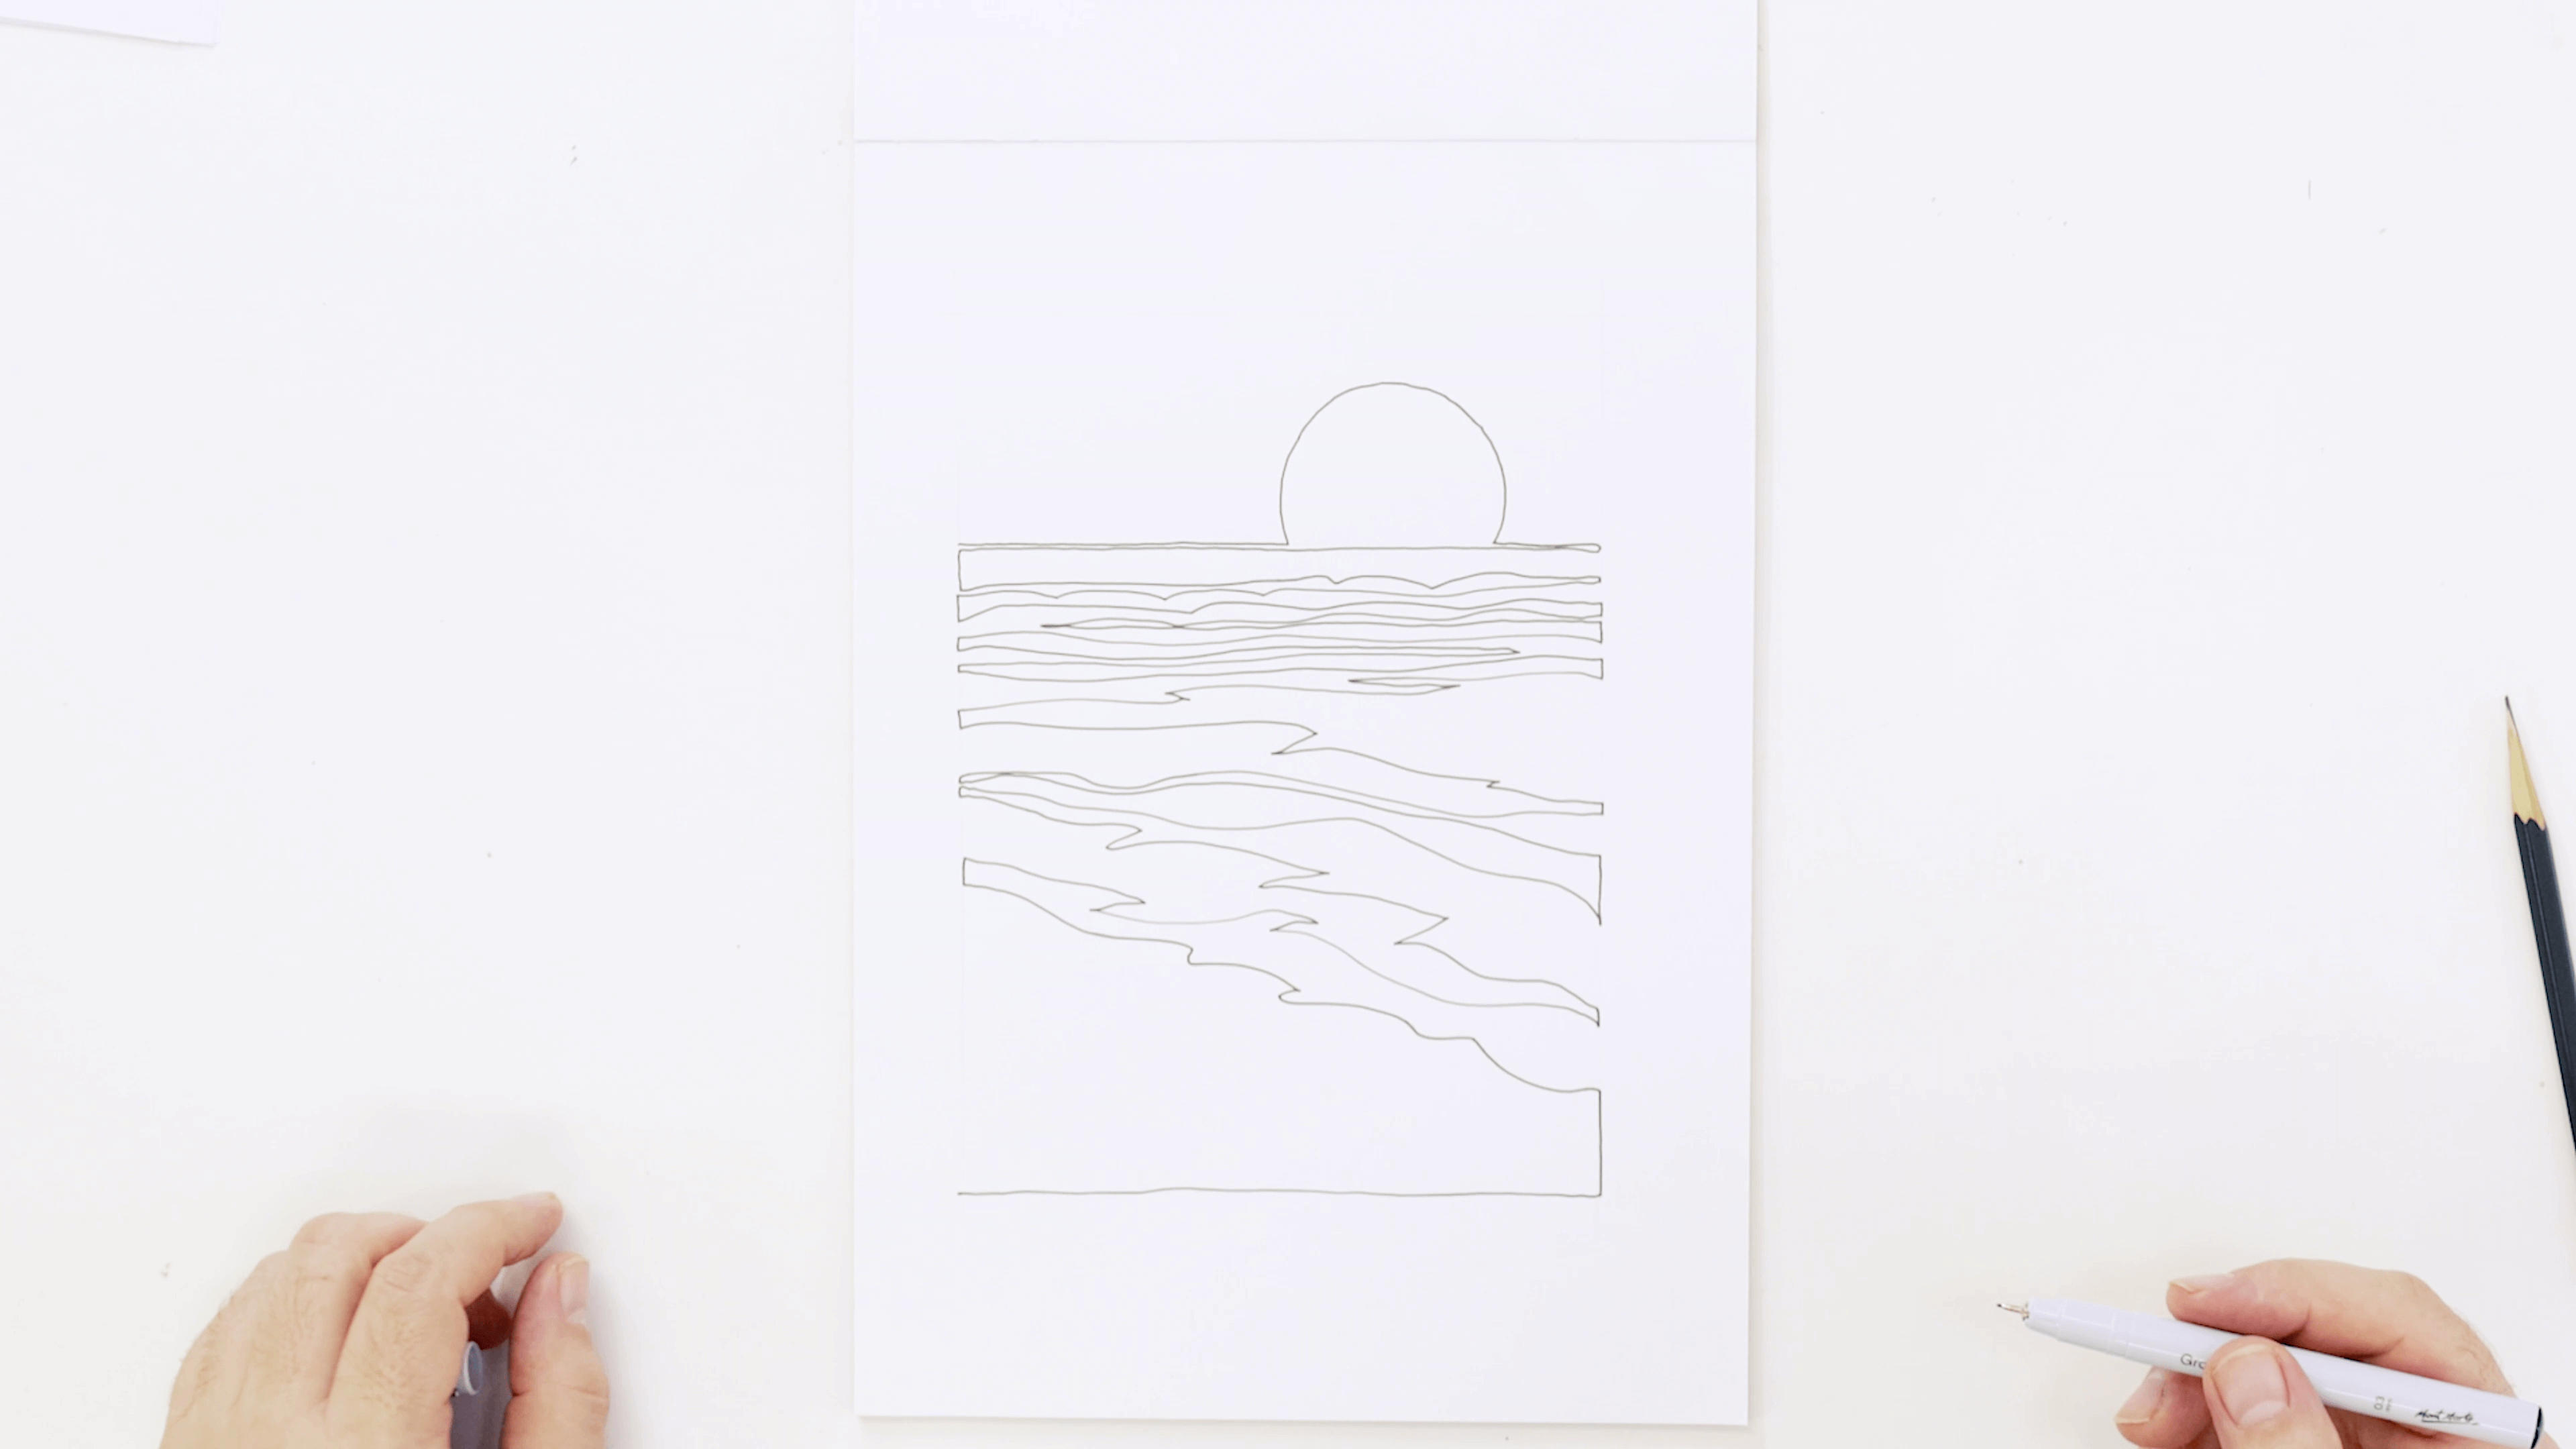 A beach landscape drawing drawn in a continuous line style with a hand holding the marker at the bottom right hand side of the page.